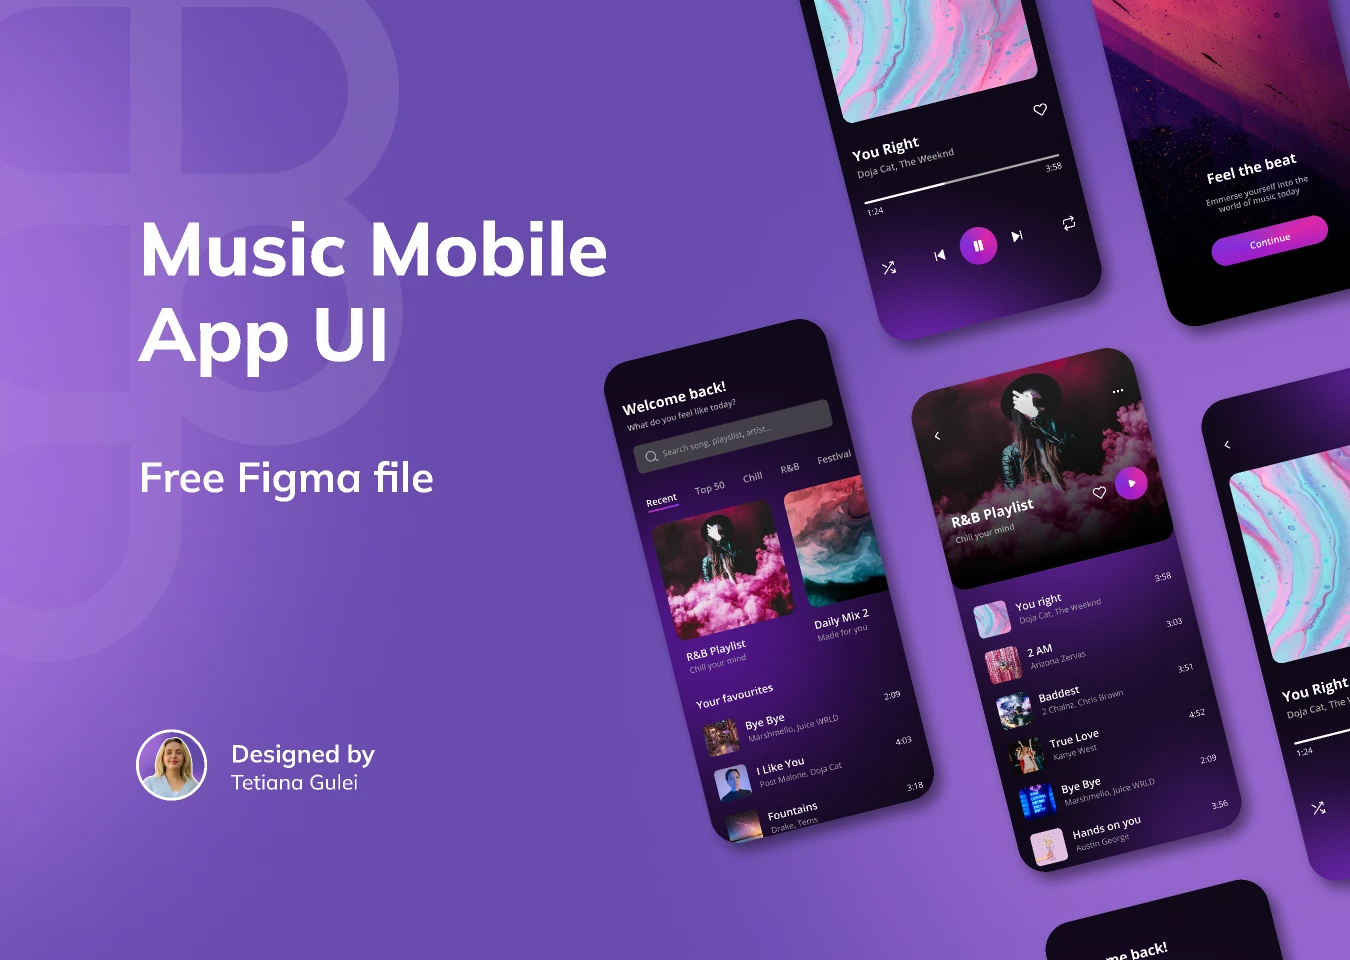 Music Mobile App UI for Figma and Adobe XD